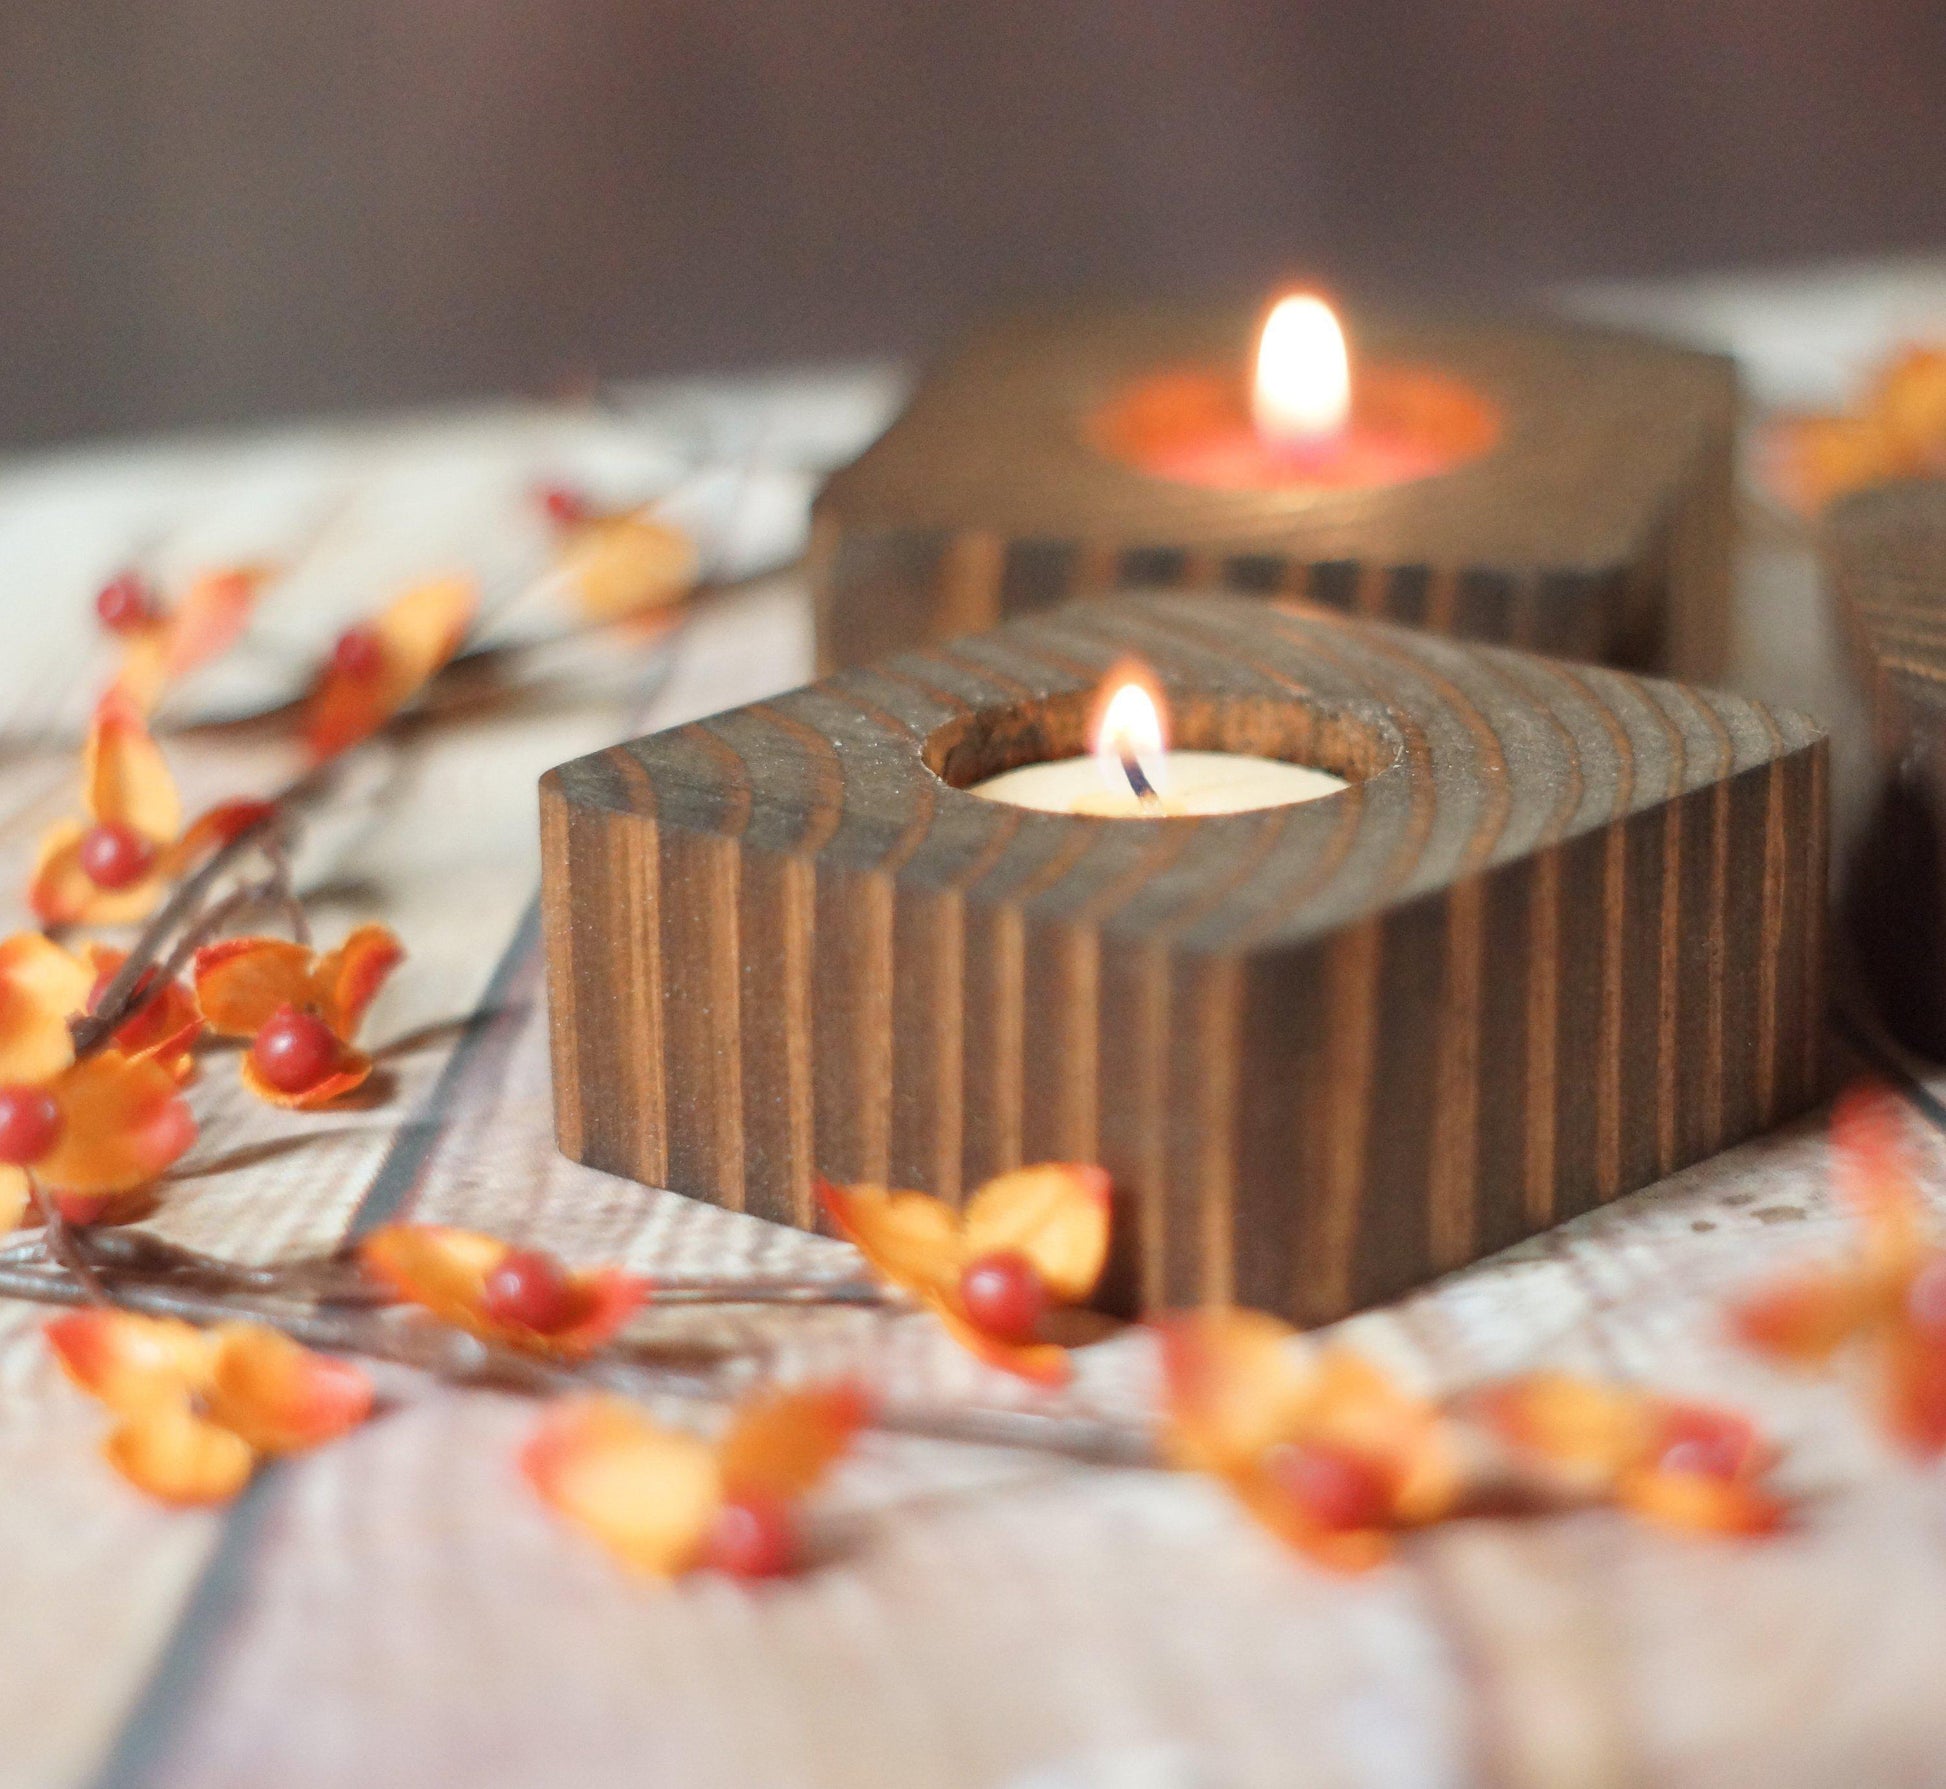 Recycled Wood Candle Holders (Set of 3)